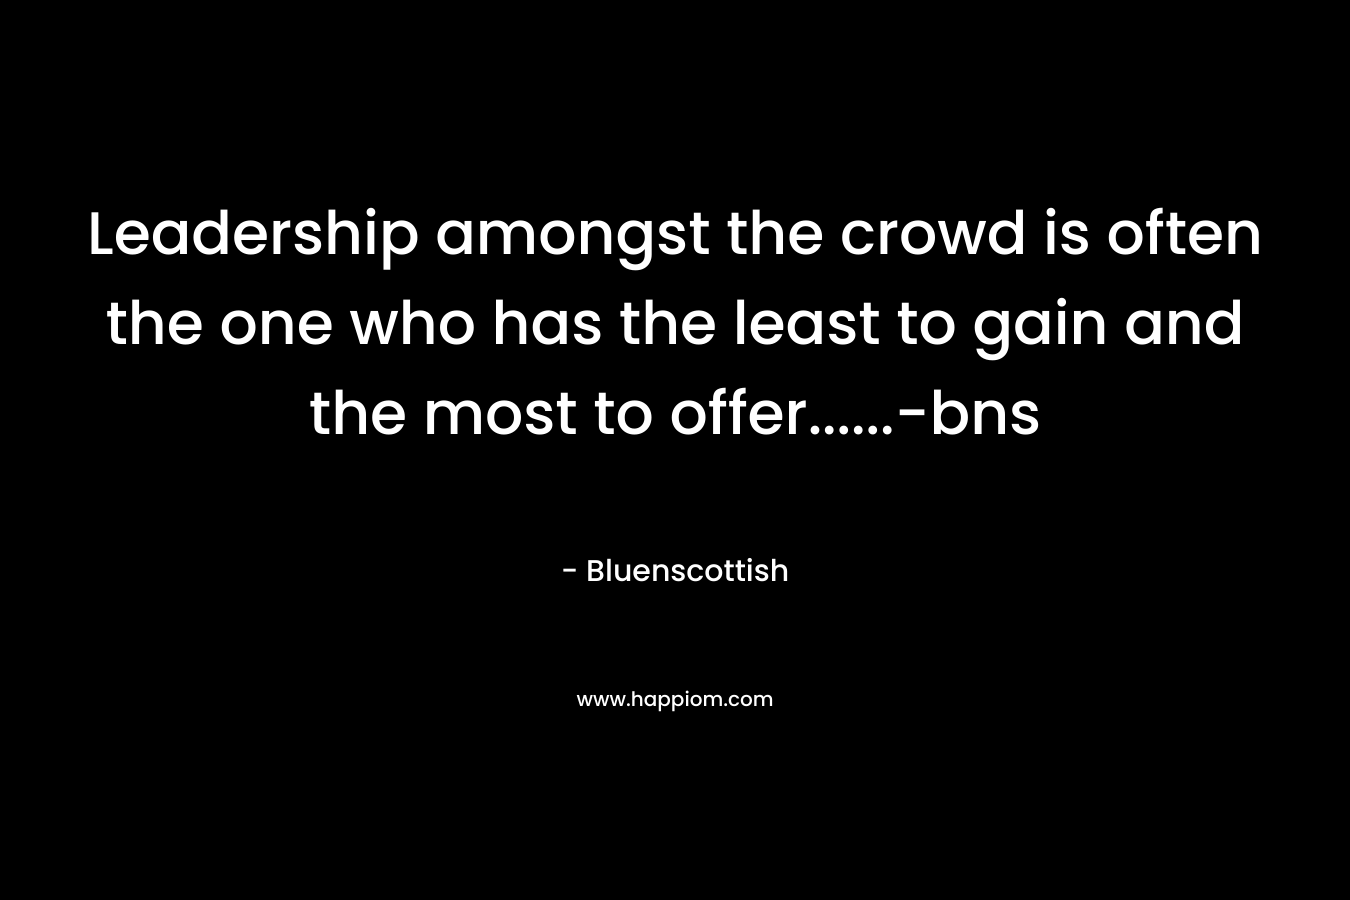 Leadership amongst the crowd is often the one who has the least to gain and the most to offer......-bns